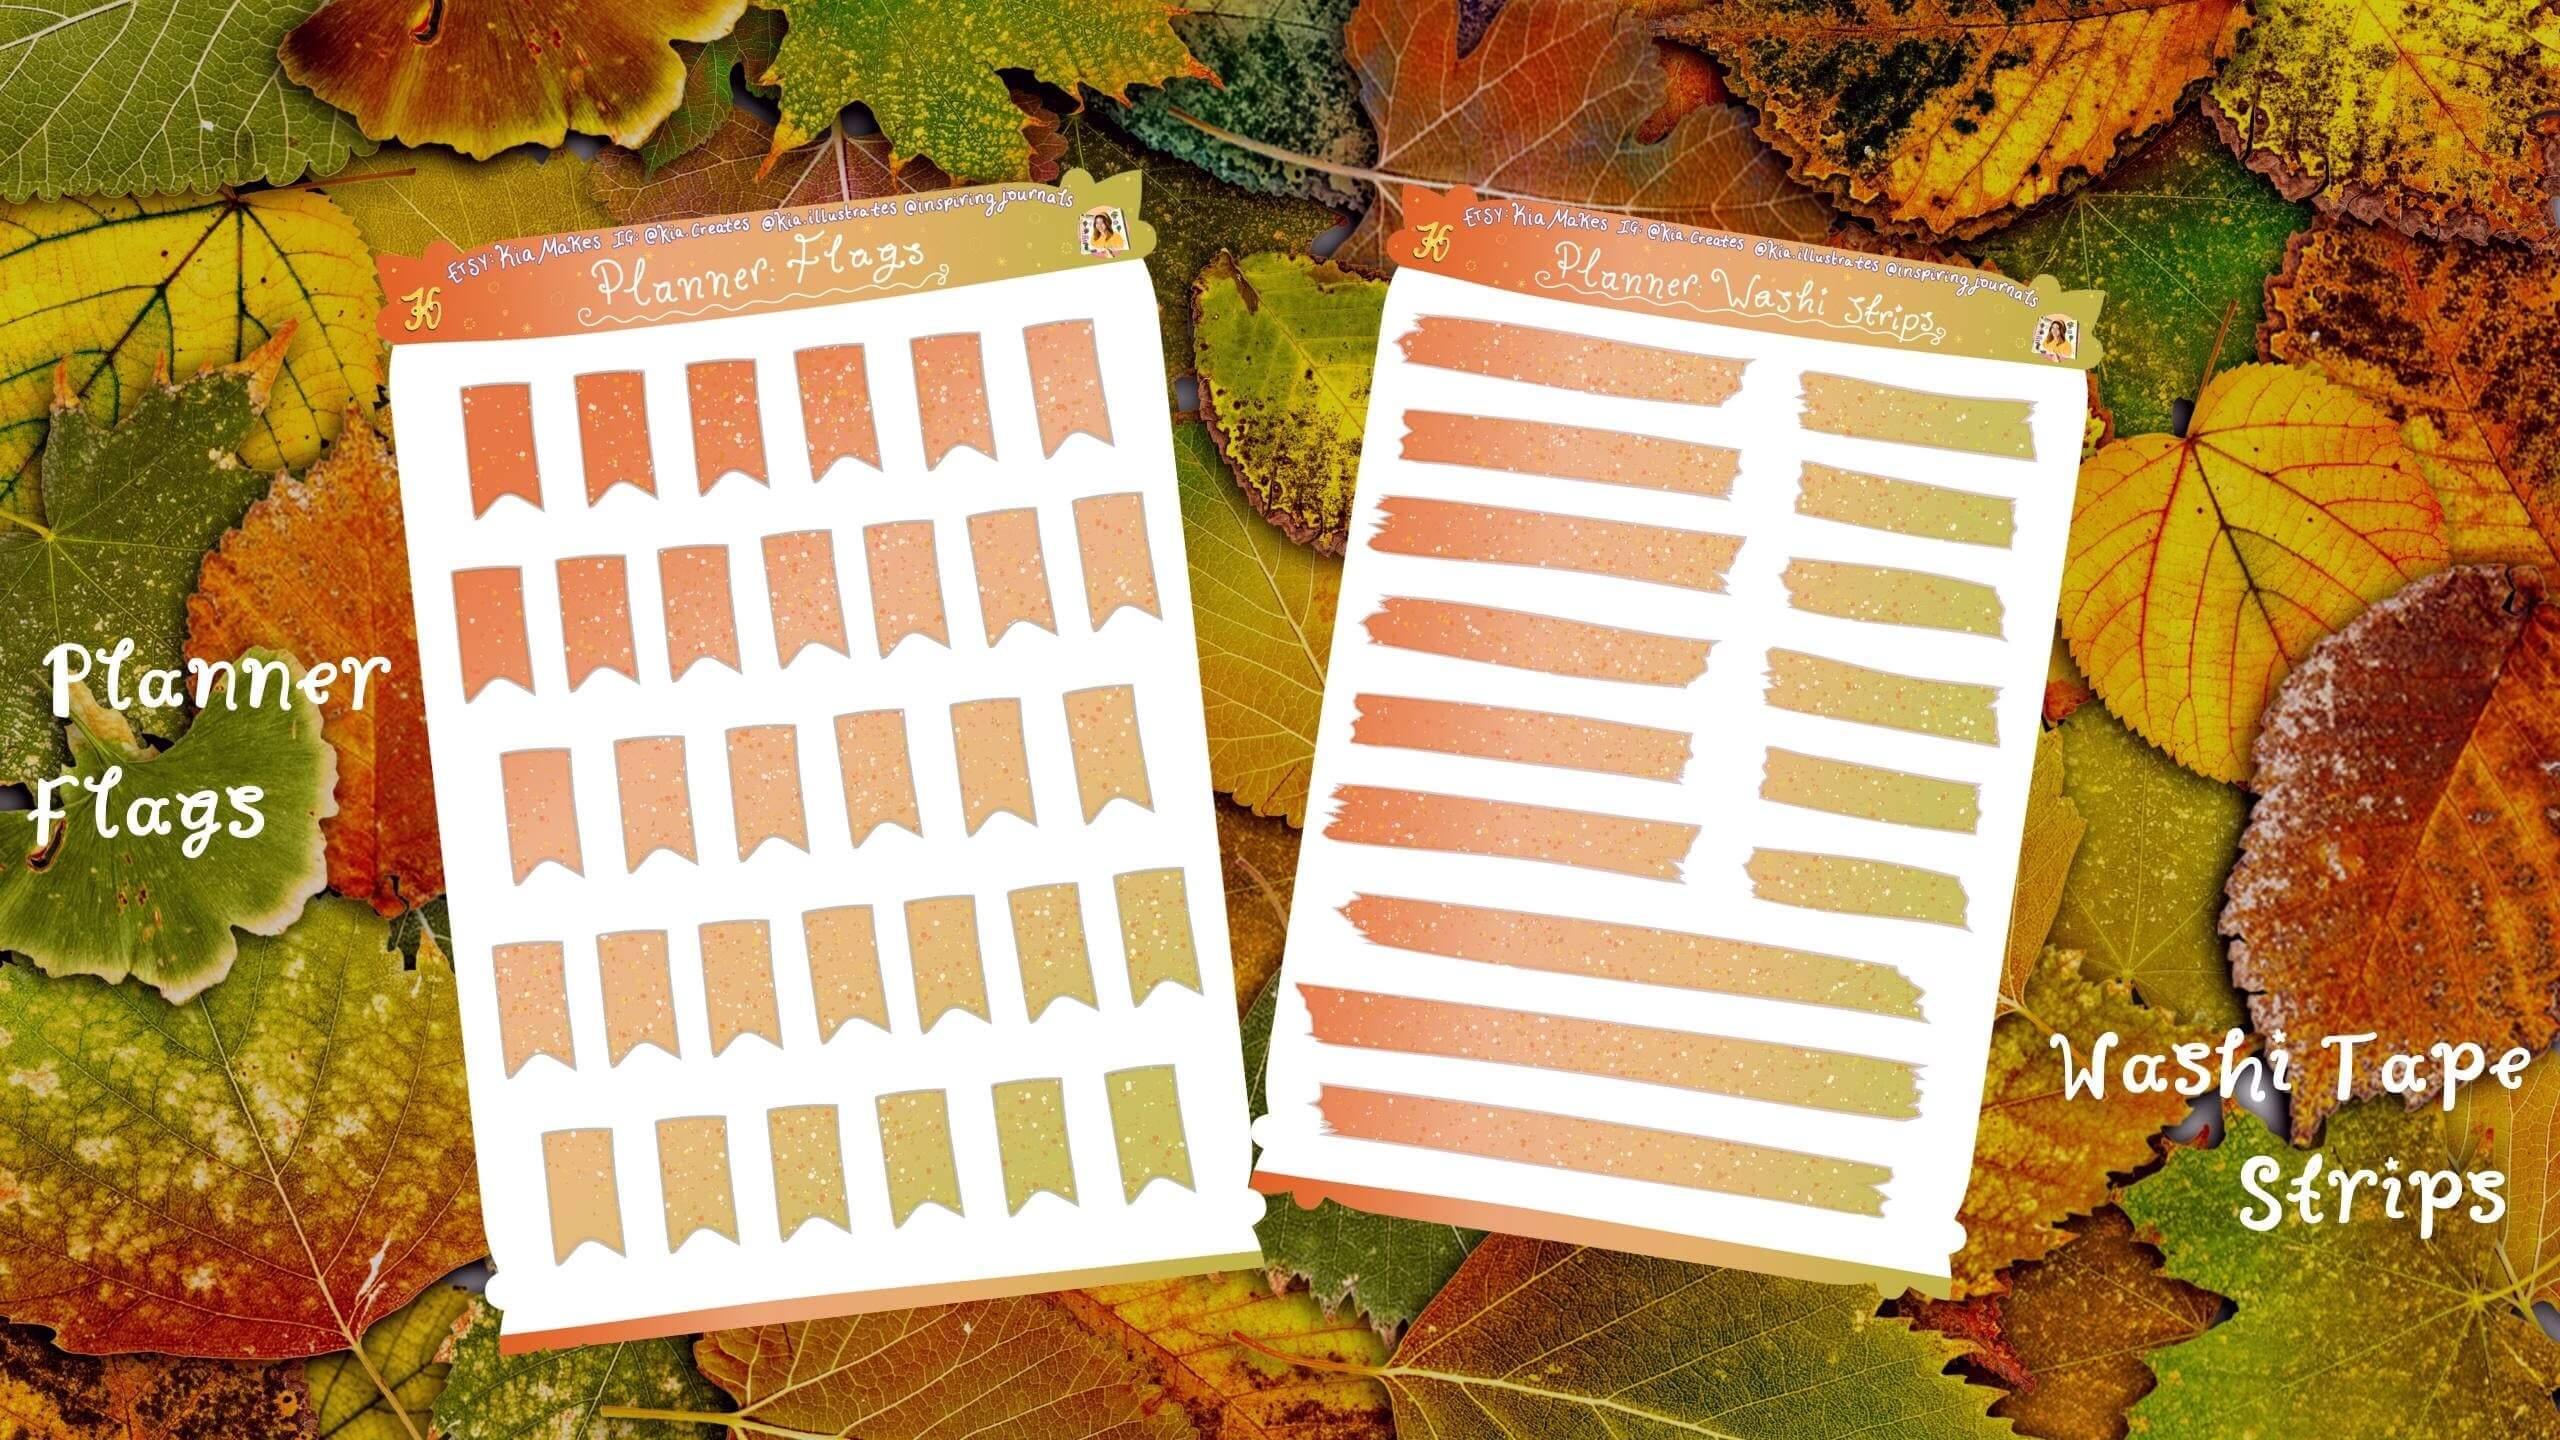 Planner stickers bundle - Autumn orange - flags and washi tape strips